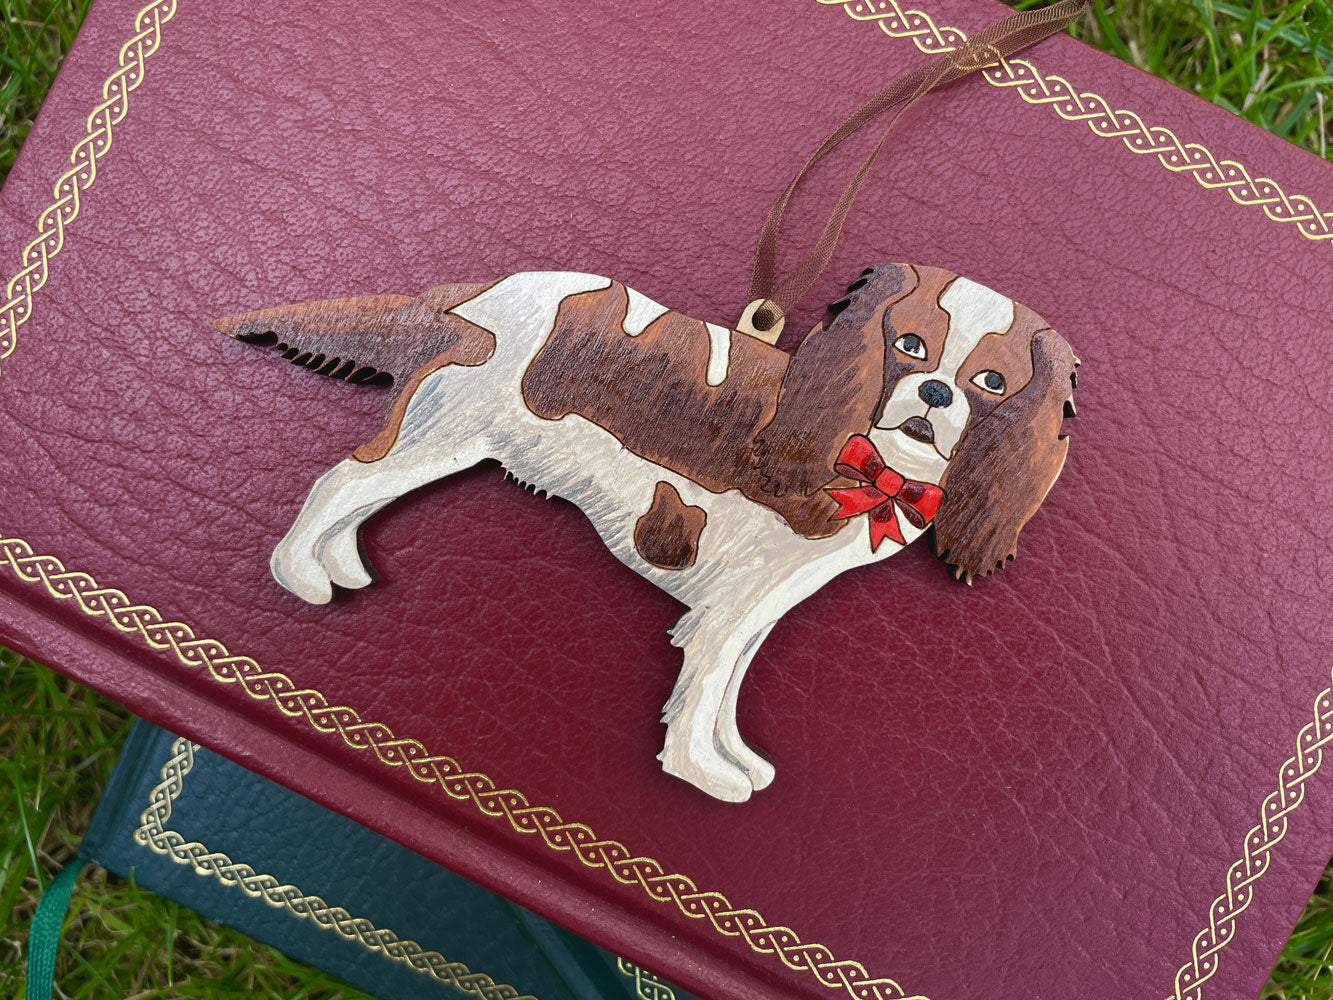 Hand Painted King Charles Cavalier Dog -  Hanging Ornament